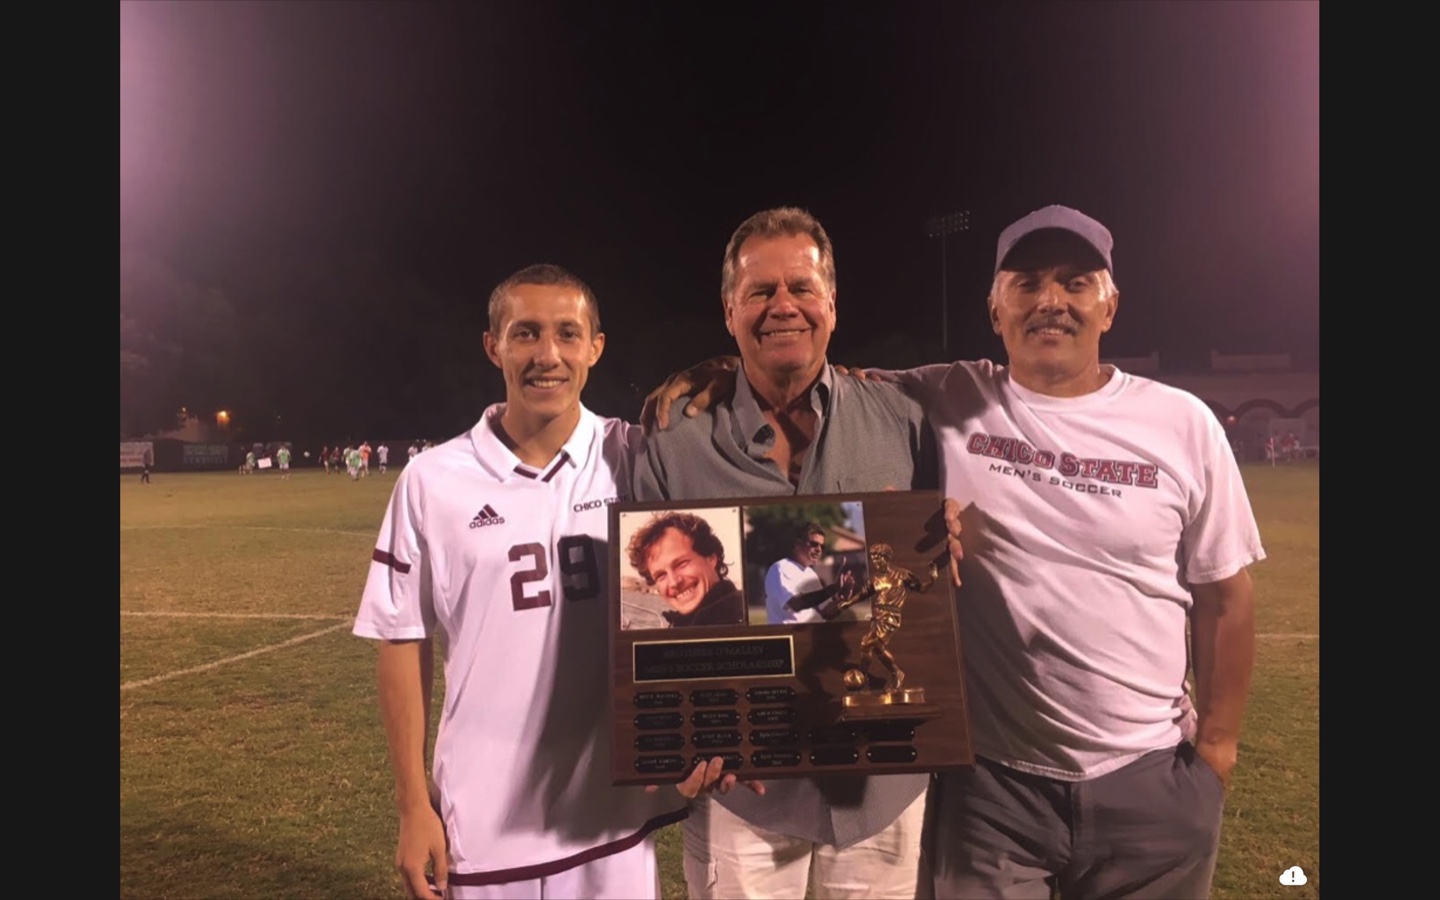 Three men pose for a photo on a soccer field, while the man in the middle holds a memorial plaque in his hands.